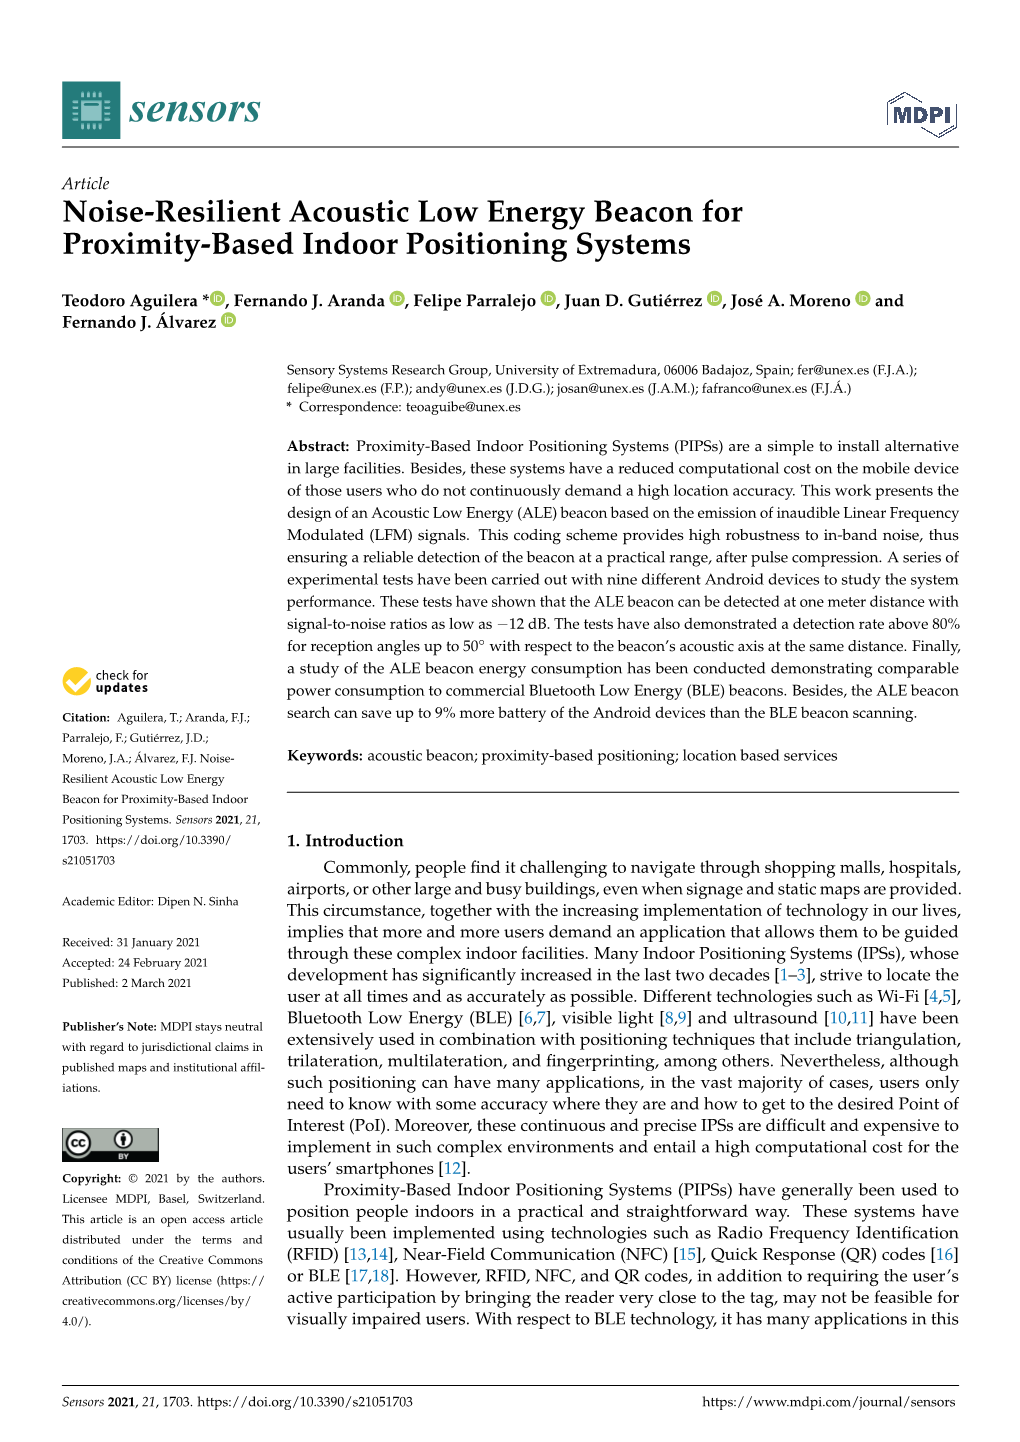 Noise-Resilient Acoustic Low Energy Beacon for Proximity-Based Indoor Positioning Systems